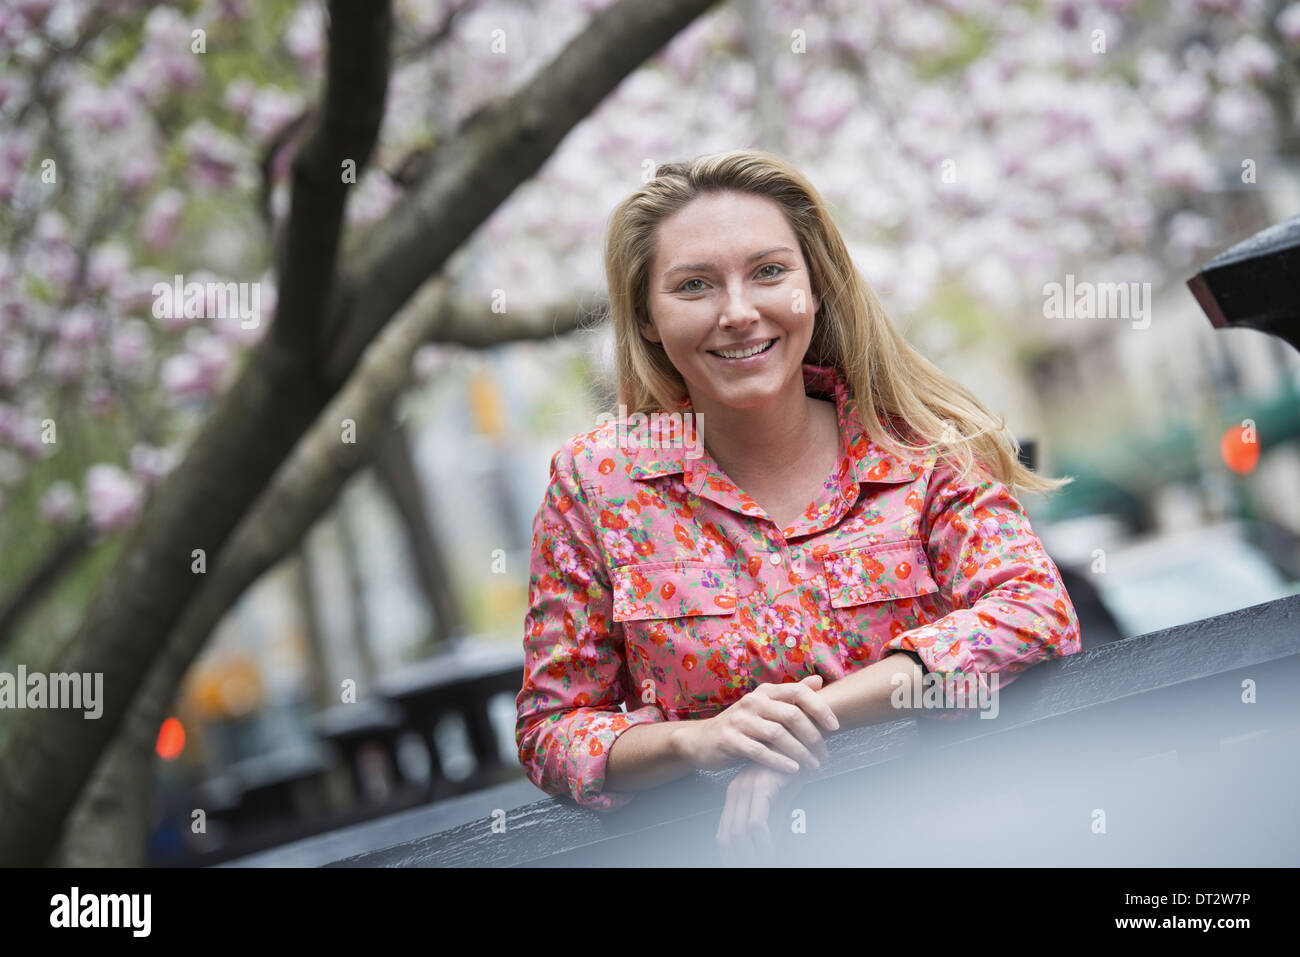 View over cityA young woman with long blonde hair outdoors in a city park Stock Photo